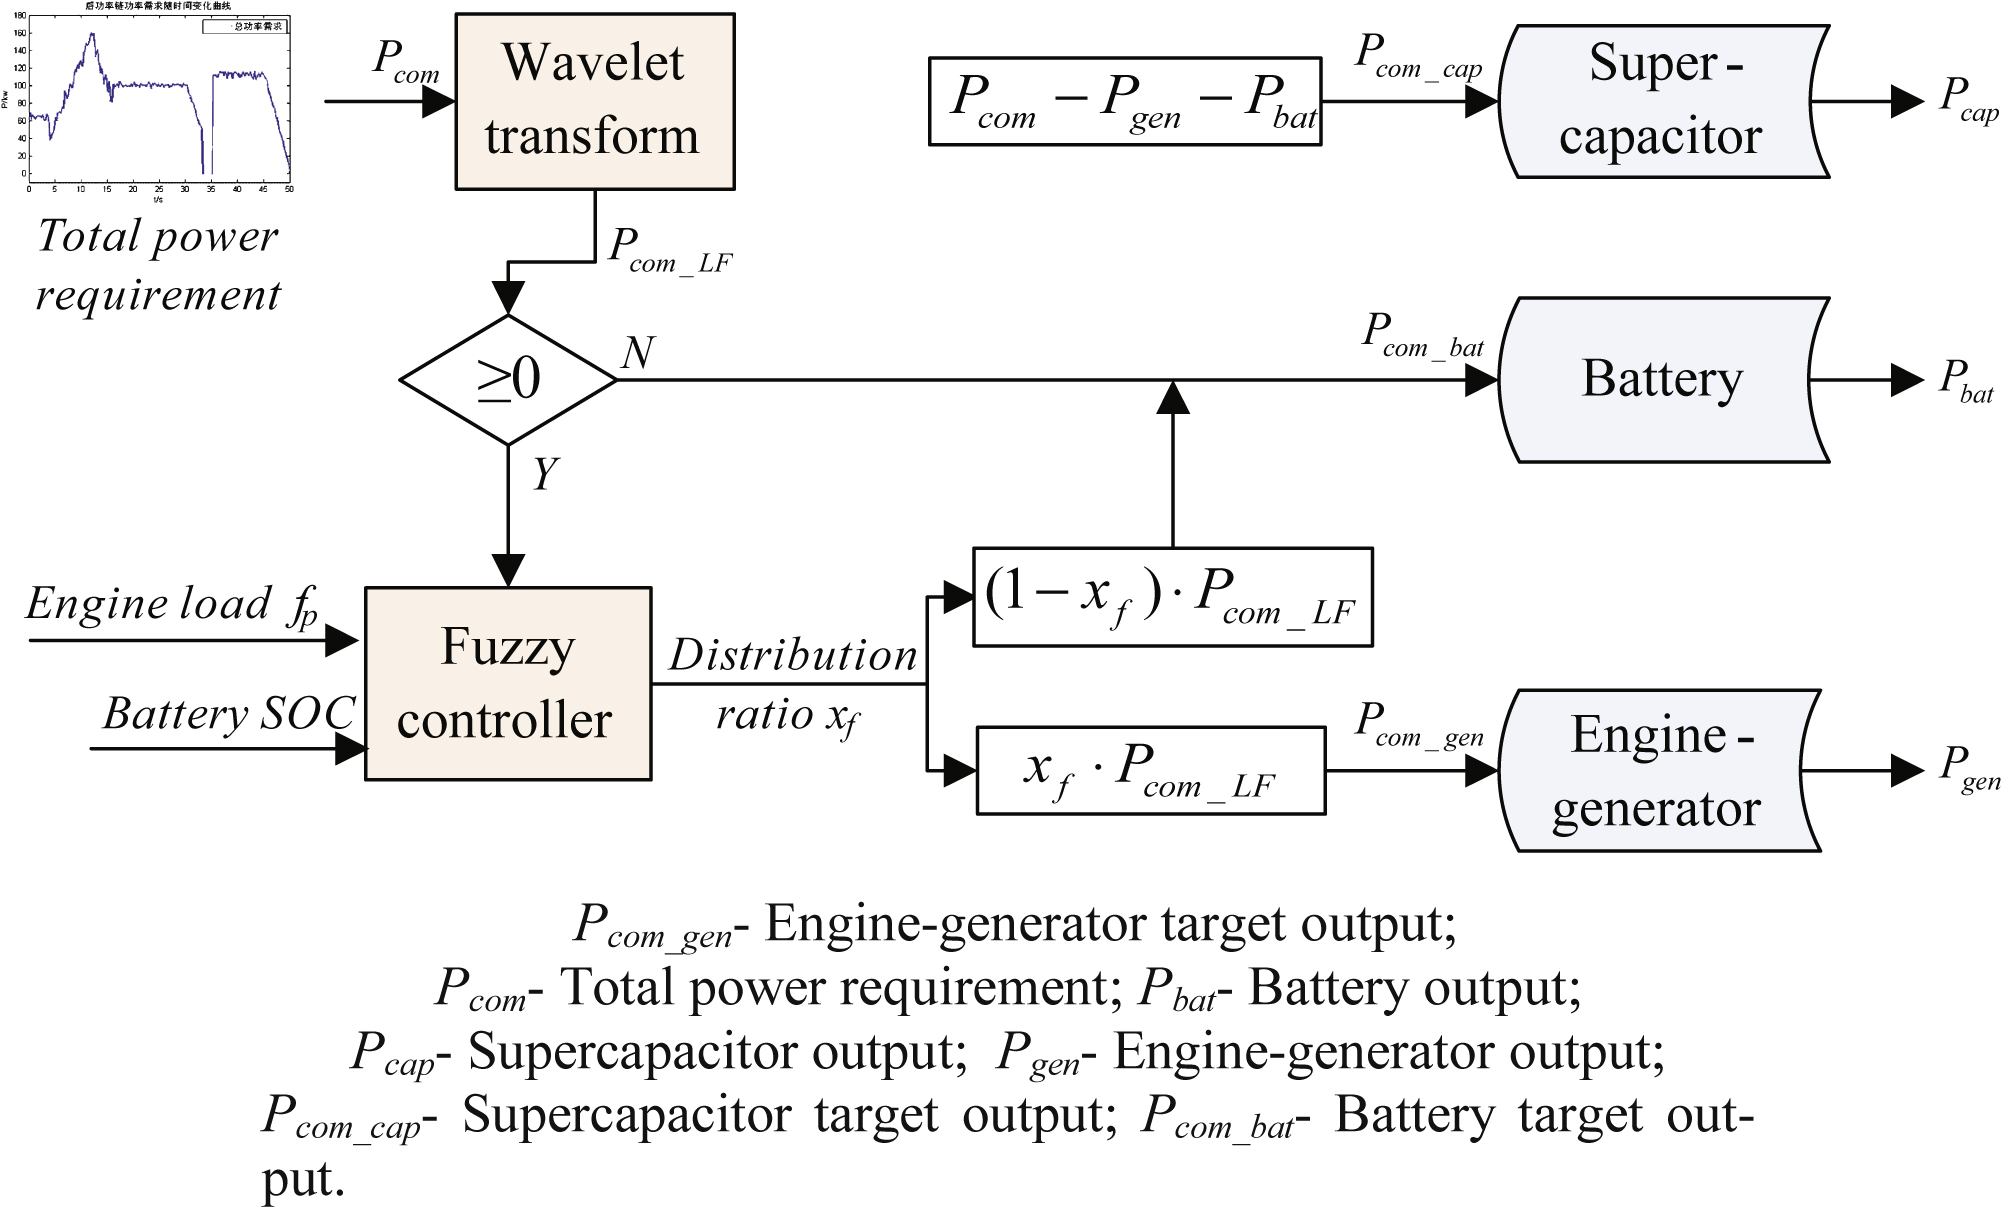 Fuzzy control and wavelet transform-based energy management strategy.